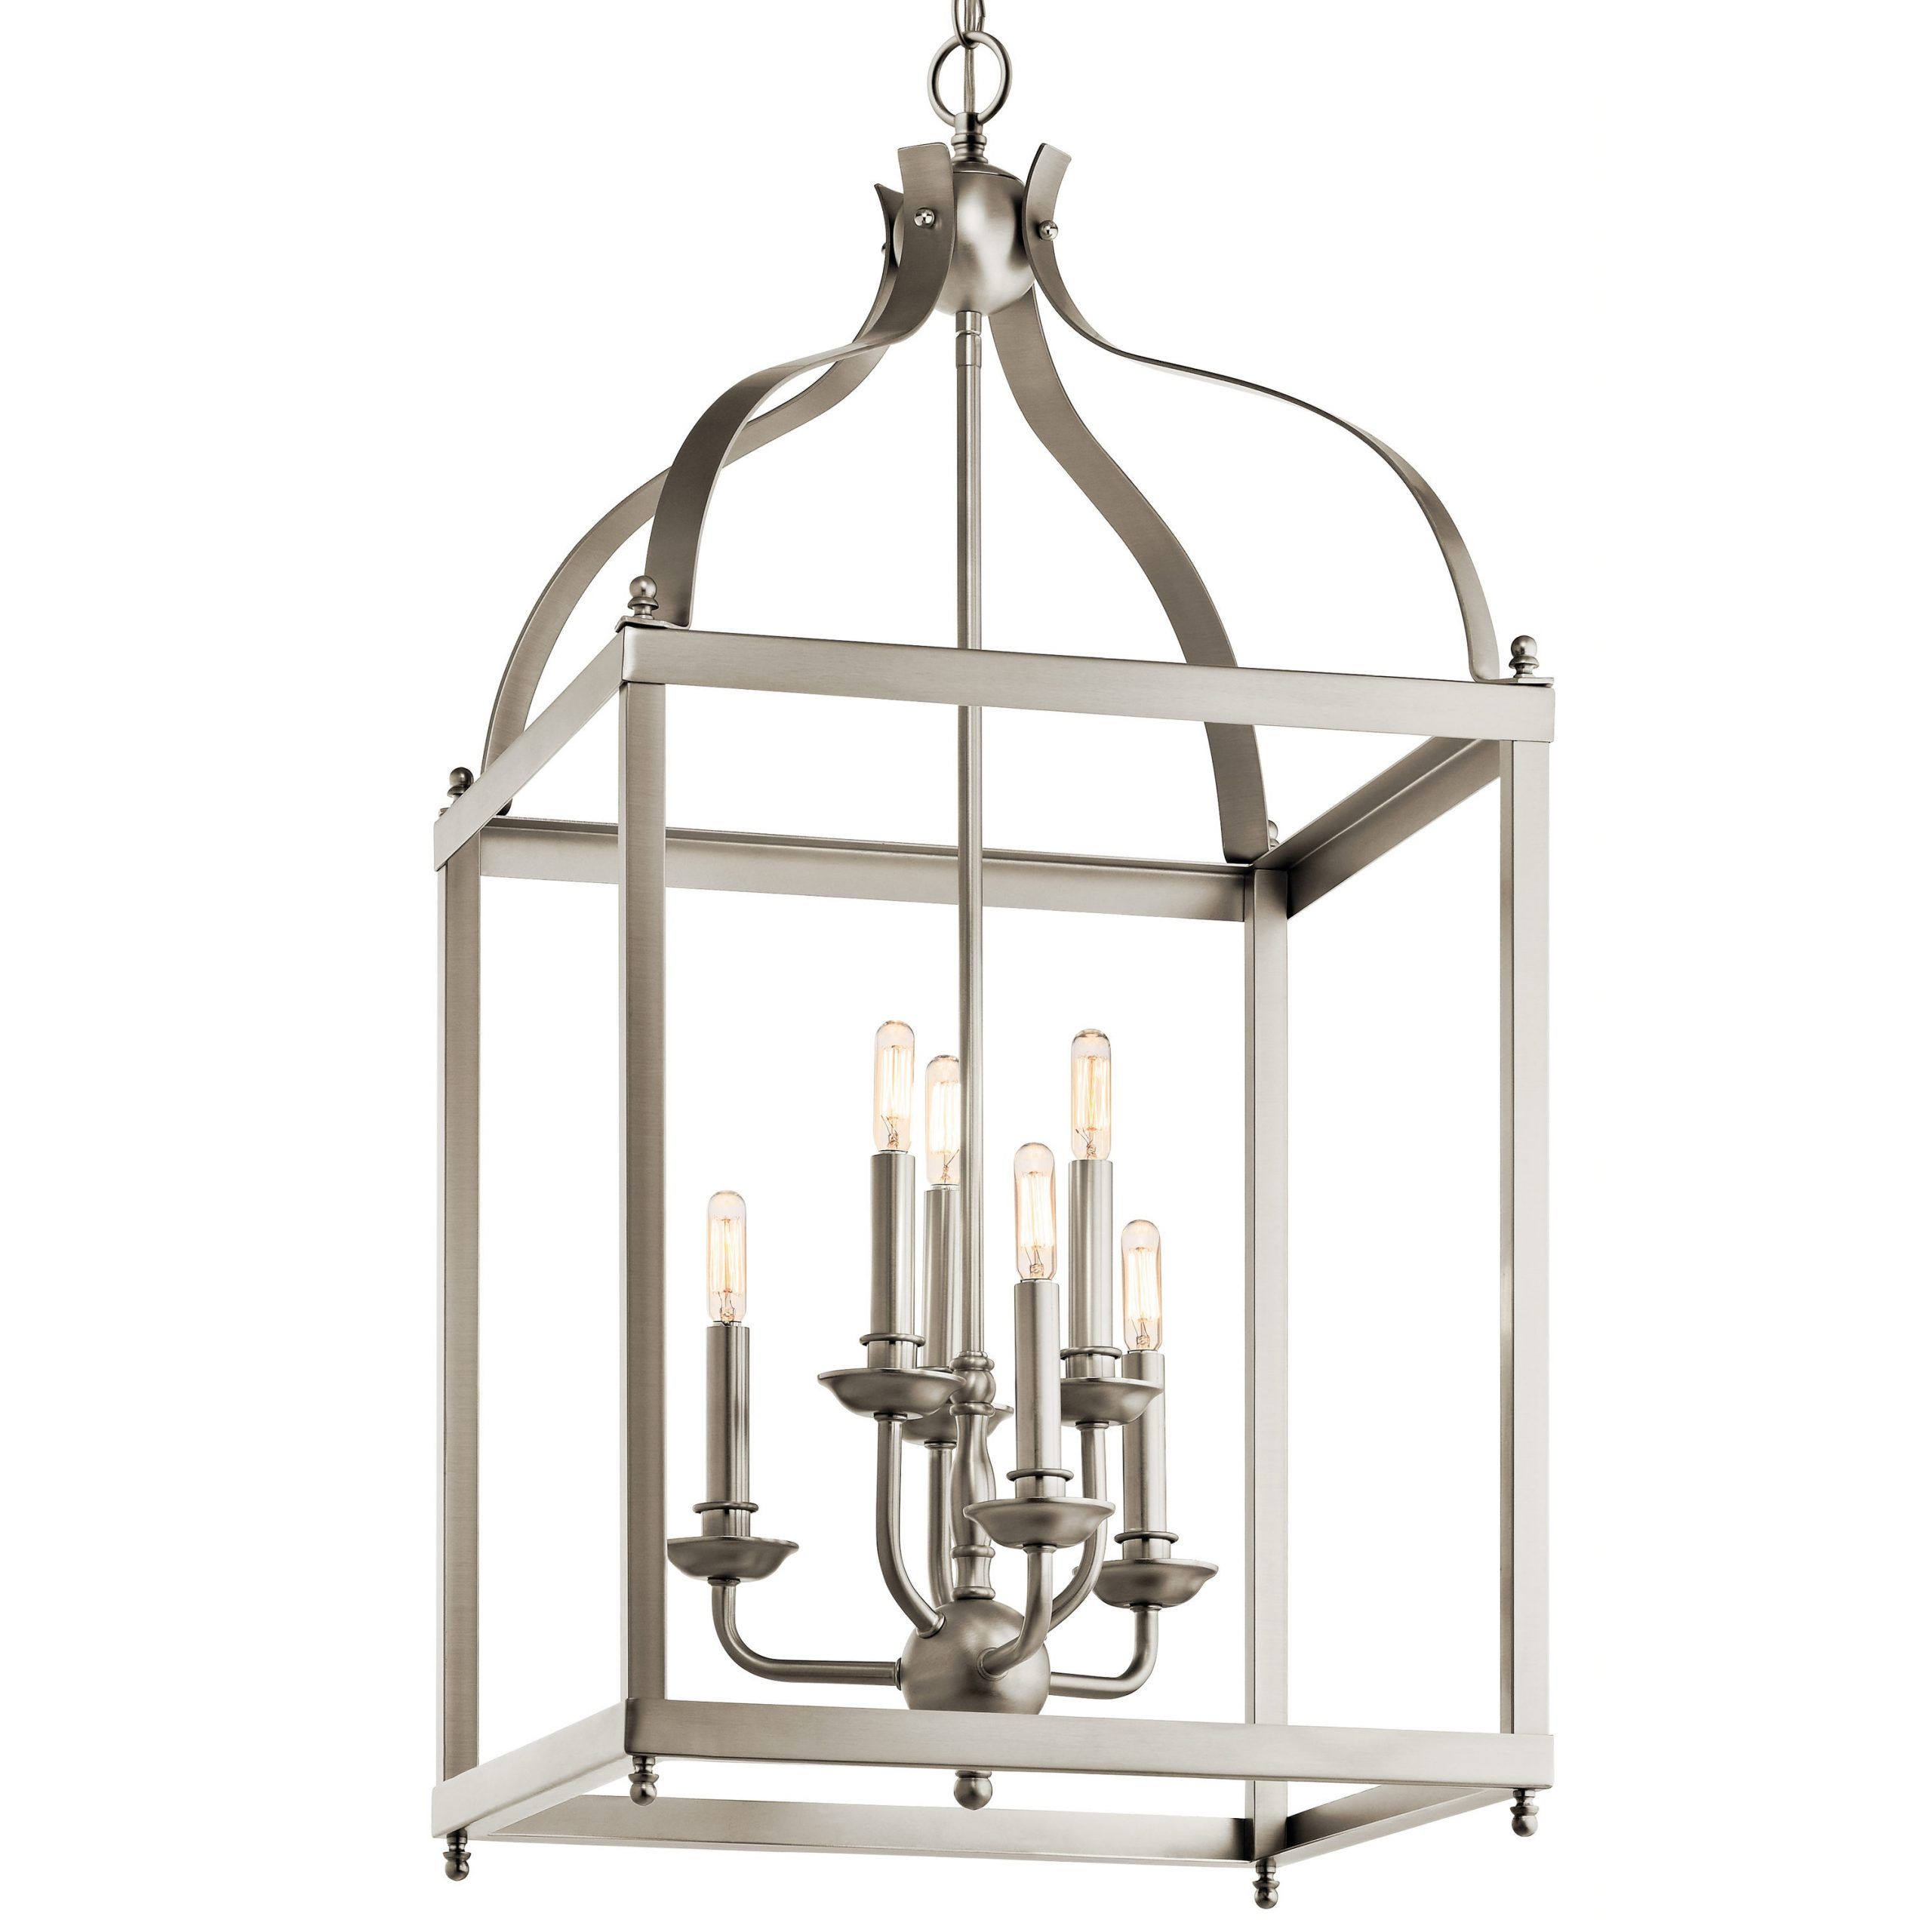 Fashionable Kichler Larkin 6 Light Brushed Nickel Transitional Lantern Pendant Light In  The Pendant Lighting Department At Lowes Within Polished Nickel Lantern Chandeliers (View 15 of 15)